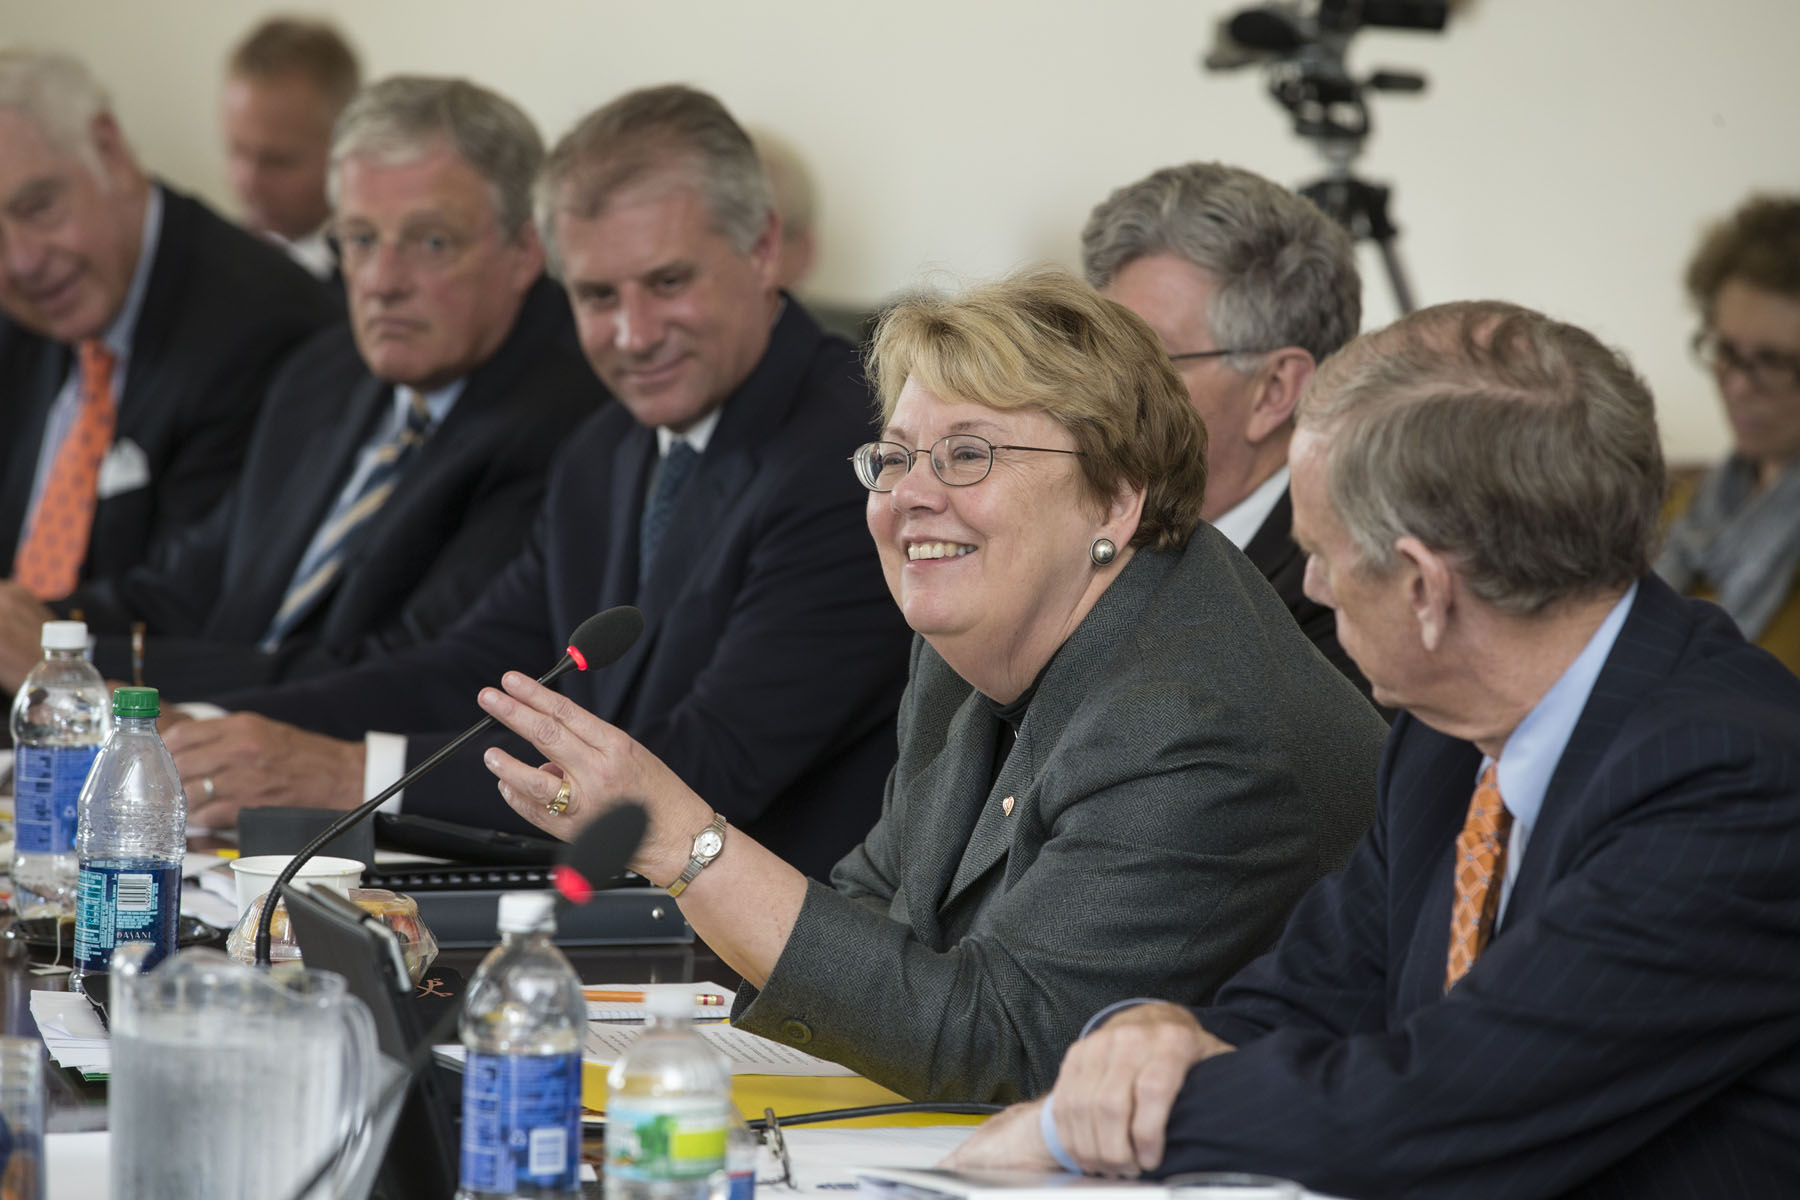 President Teresa Sullivan speaking into a microphone at a Board of Vistors meeting